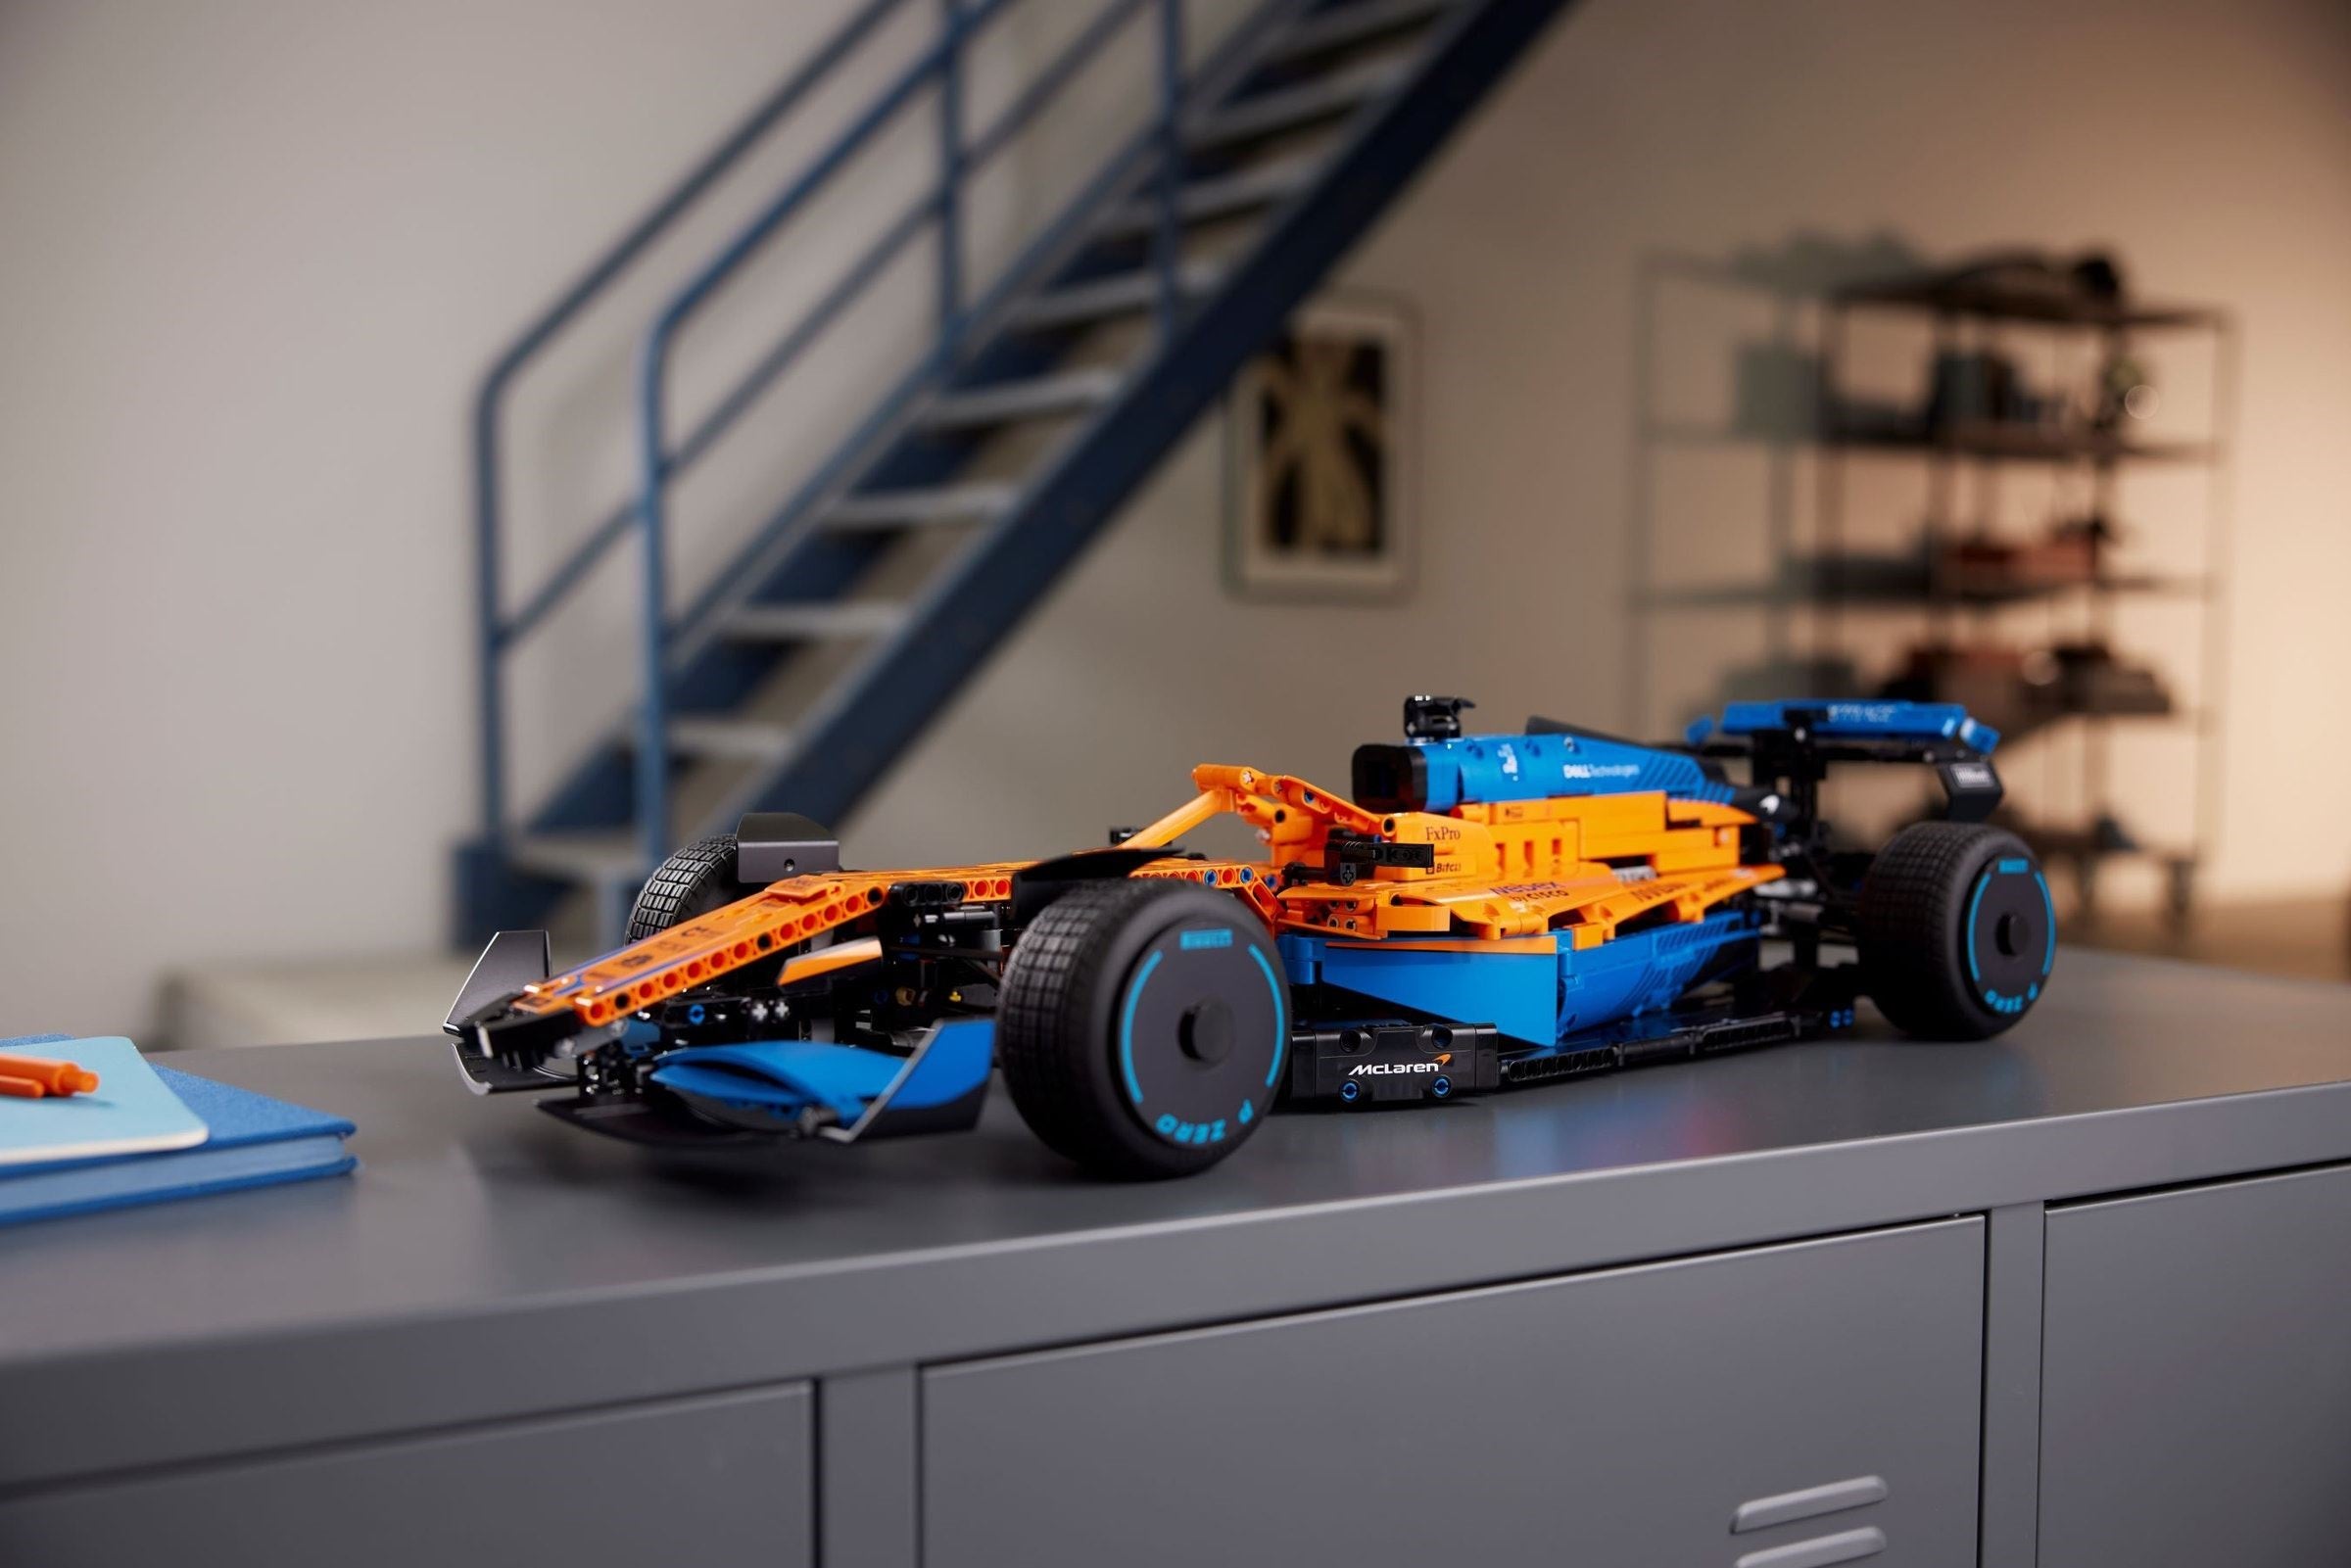 McLaren Formula 1 Race Car 42141 LEGO Technic Buy online at the Official alab.toys store